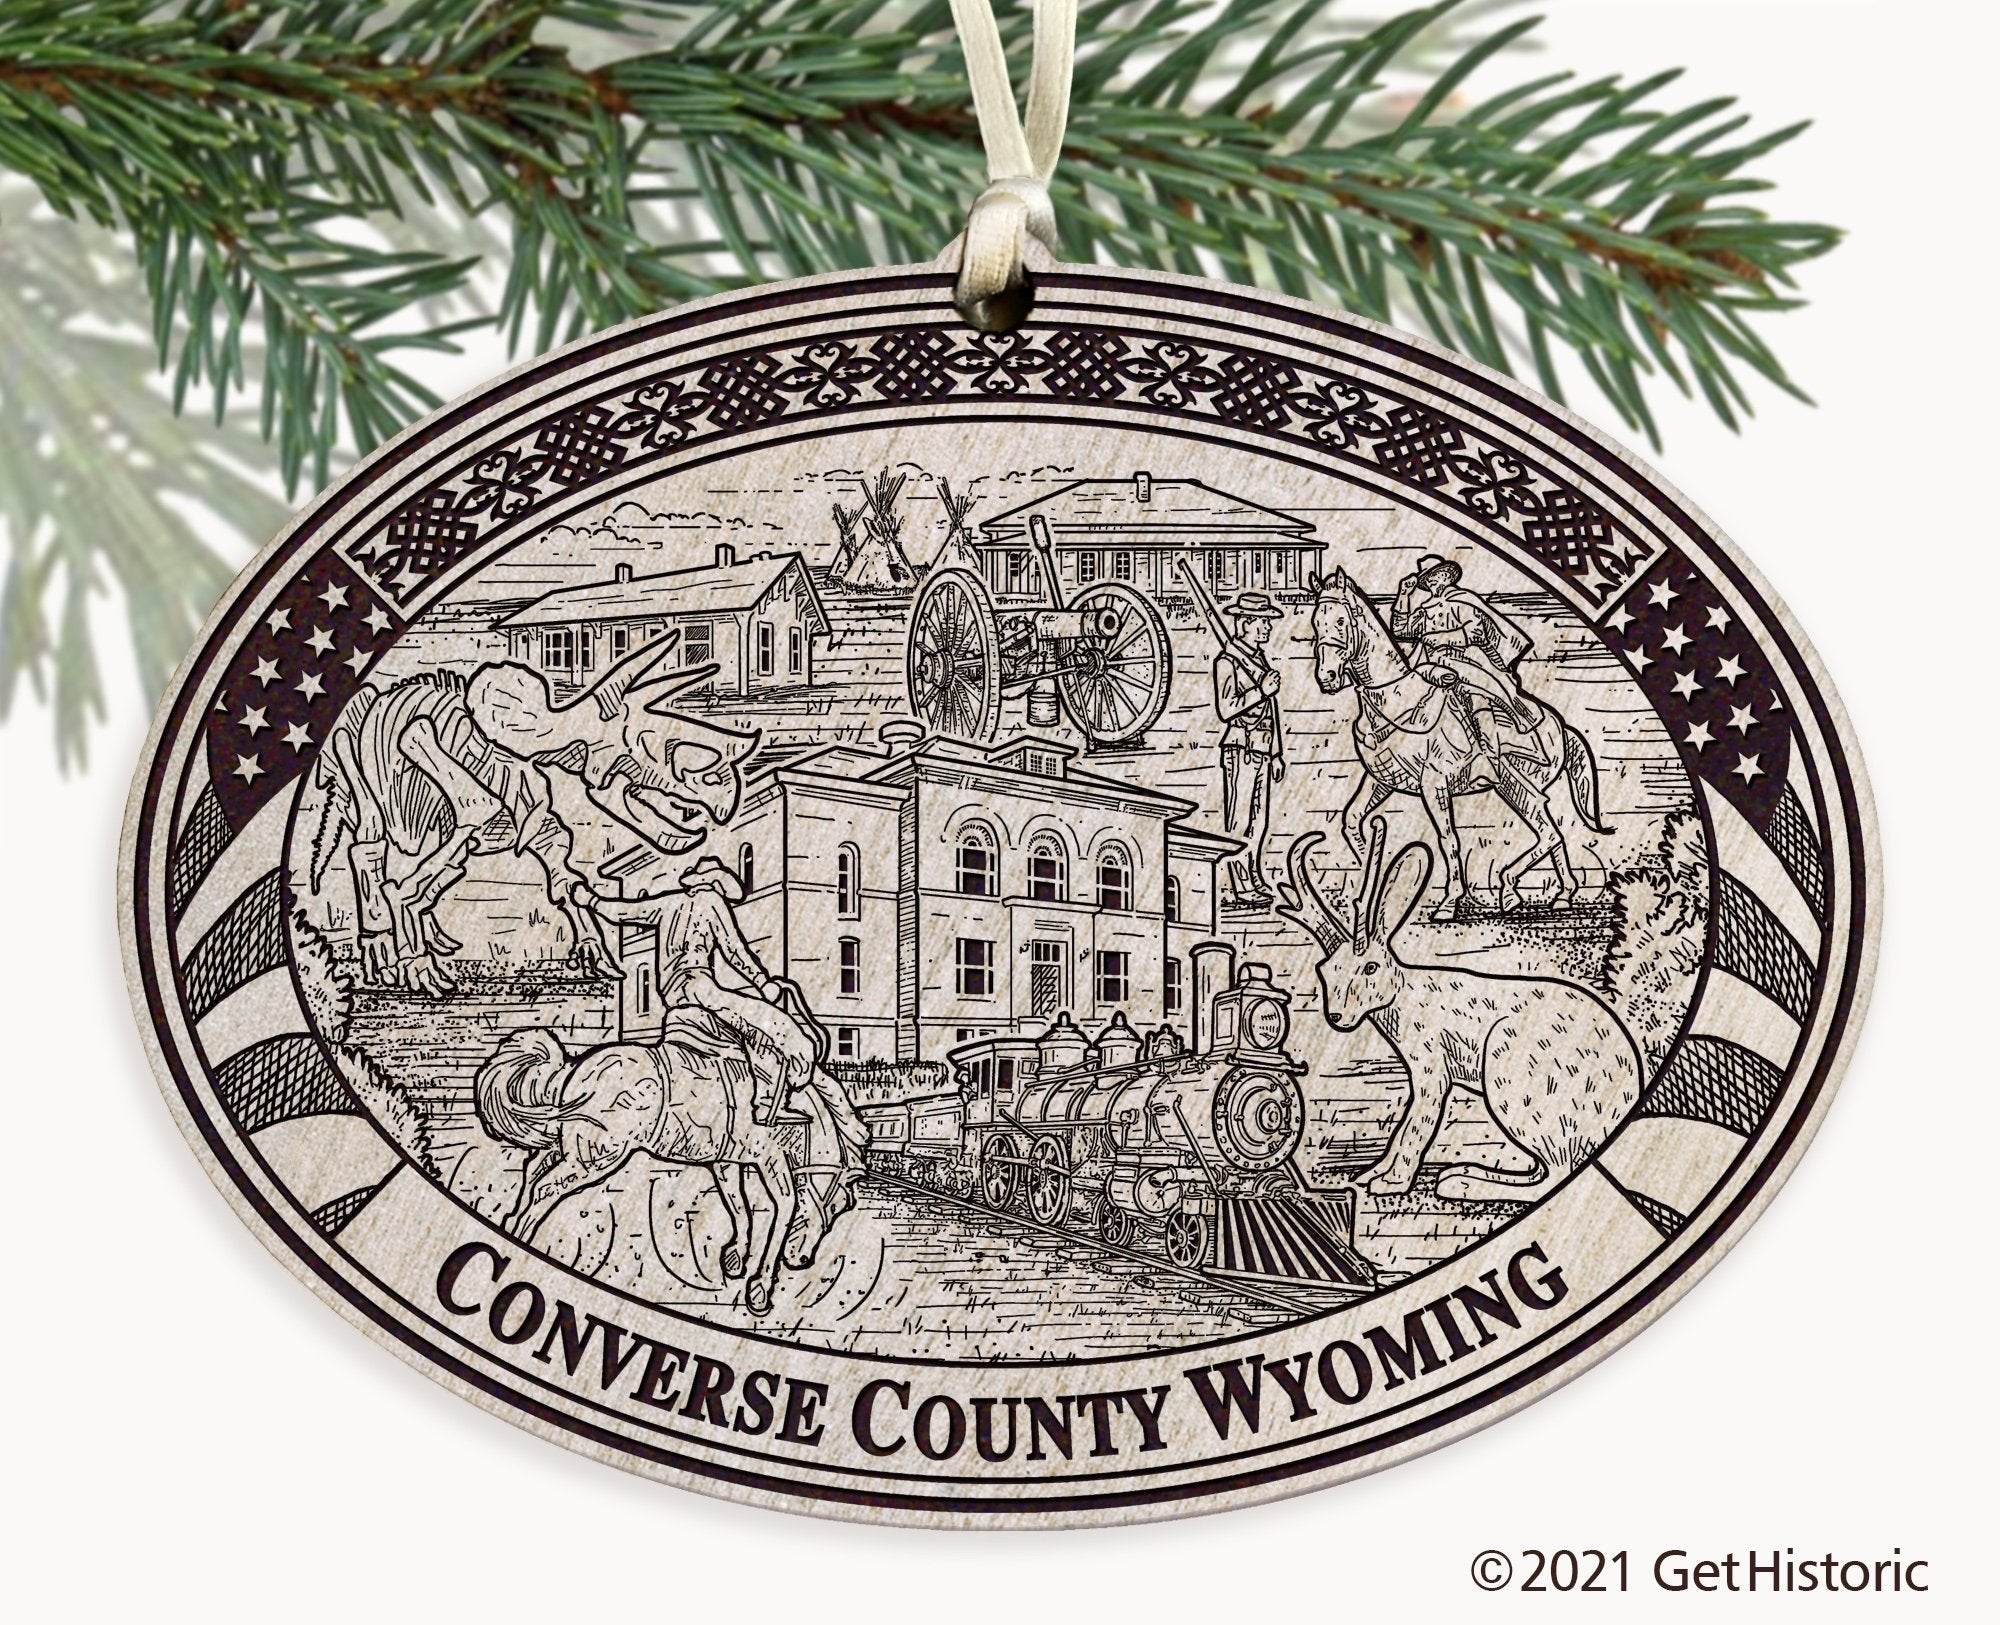 Converse County Wyoming Engraved Ornament